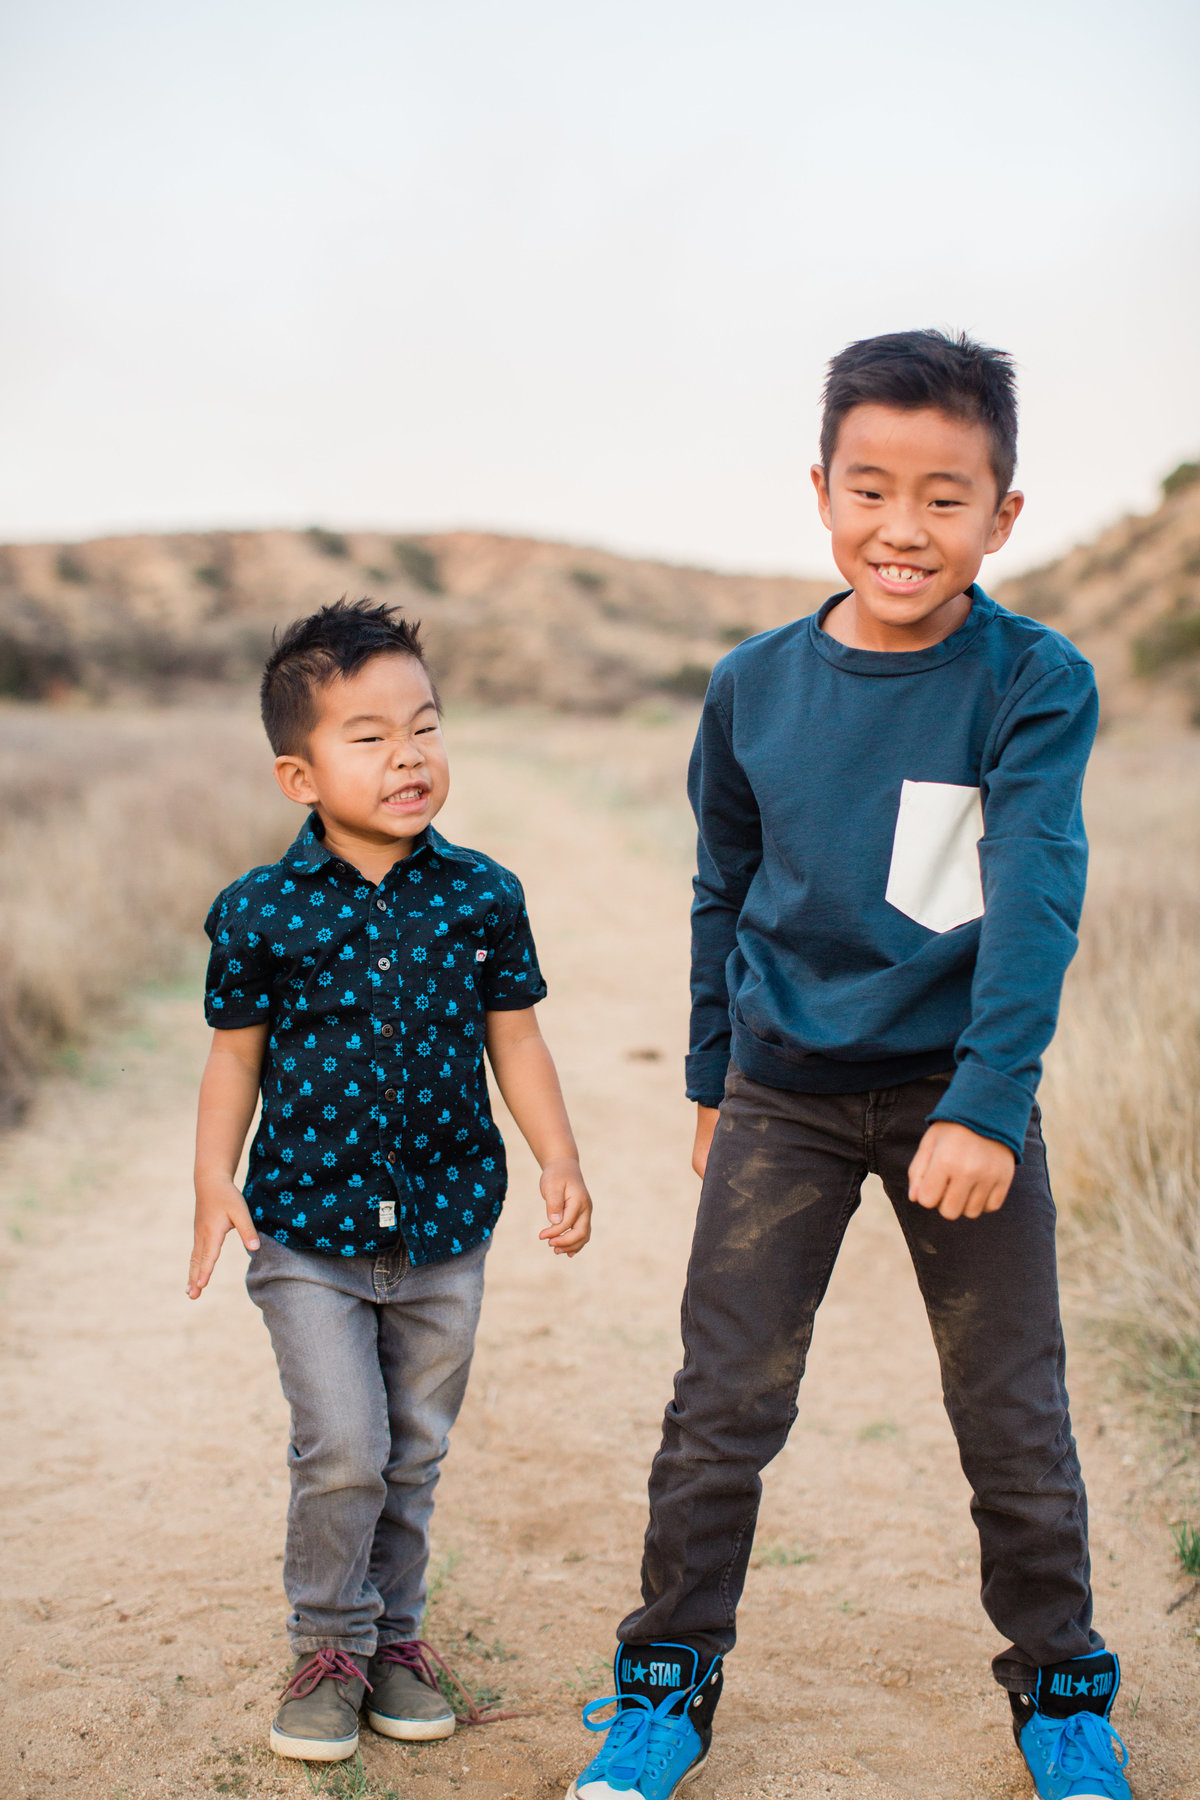 The Wong Family 2018 | Redlands Family Photographer | Katie Schoepflin Photography99